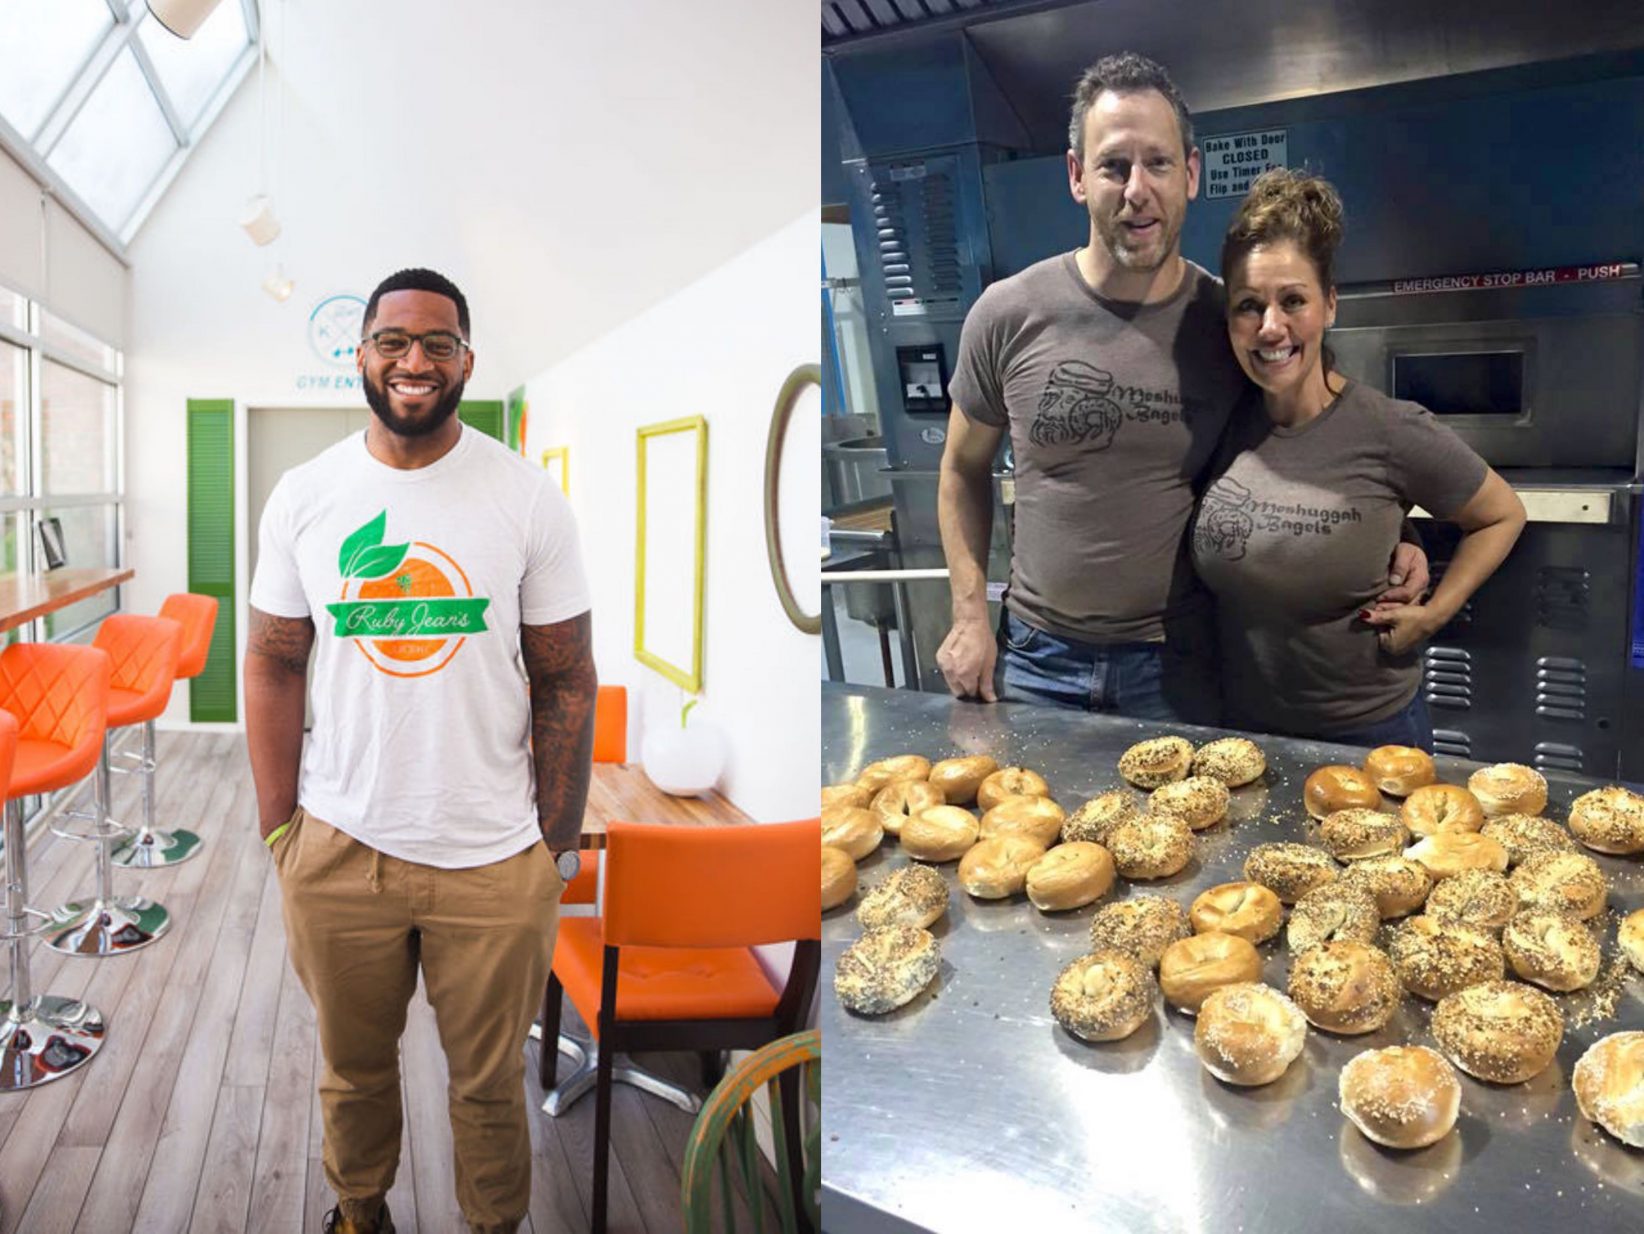 How Meshuggah Bagels and Ruby Jean’s Juicery dealt with rapid growth